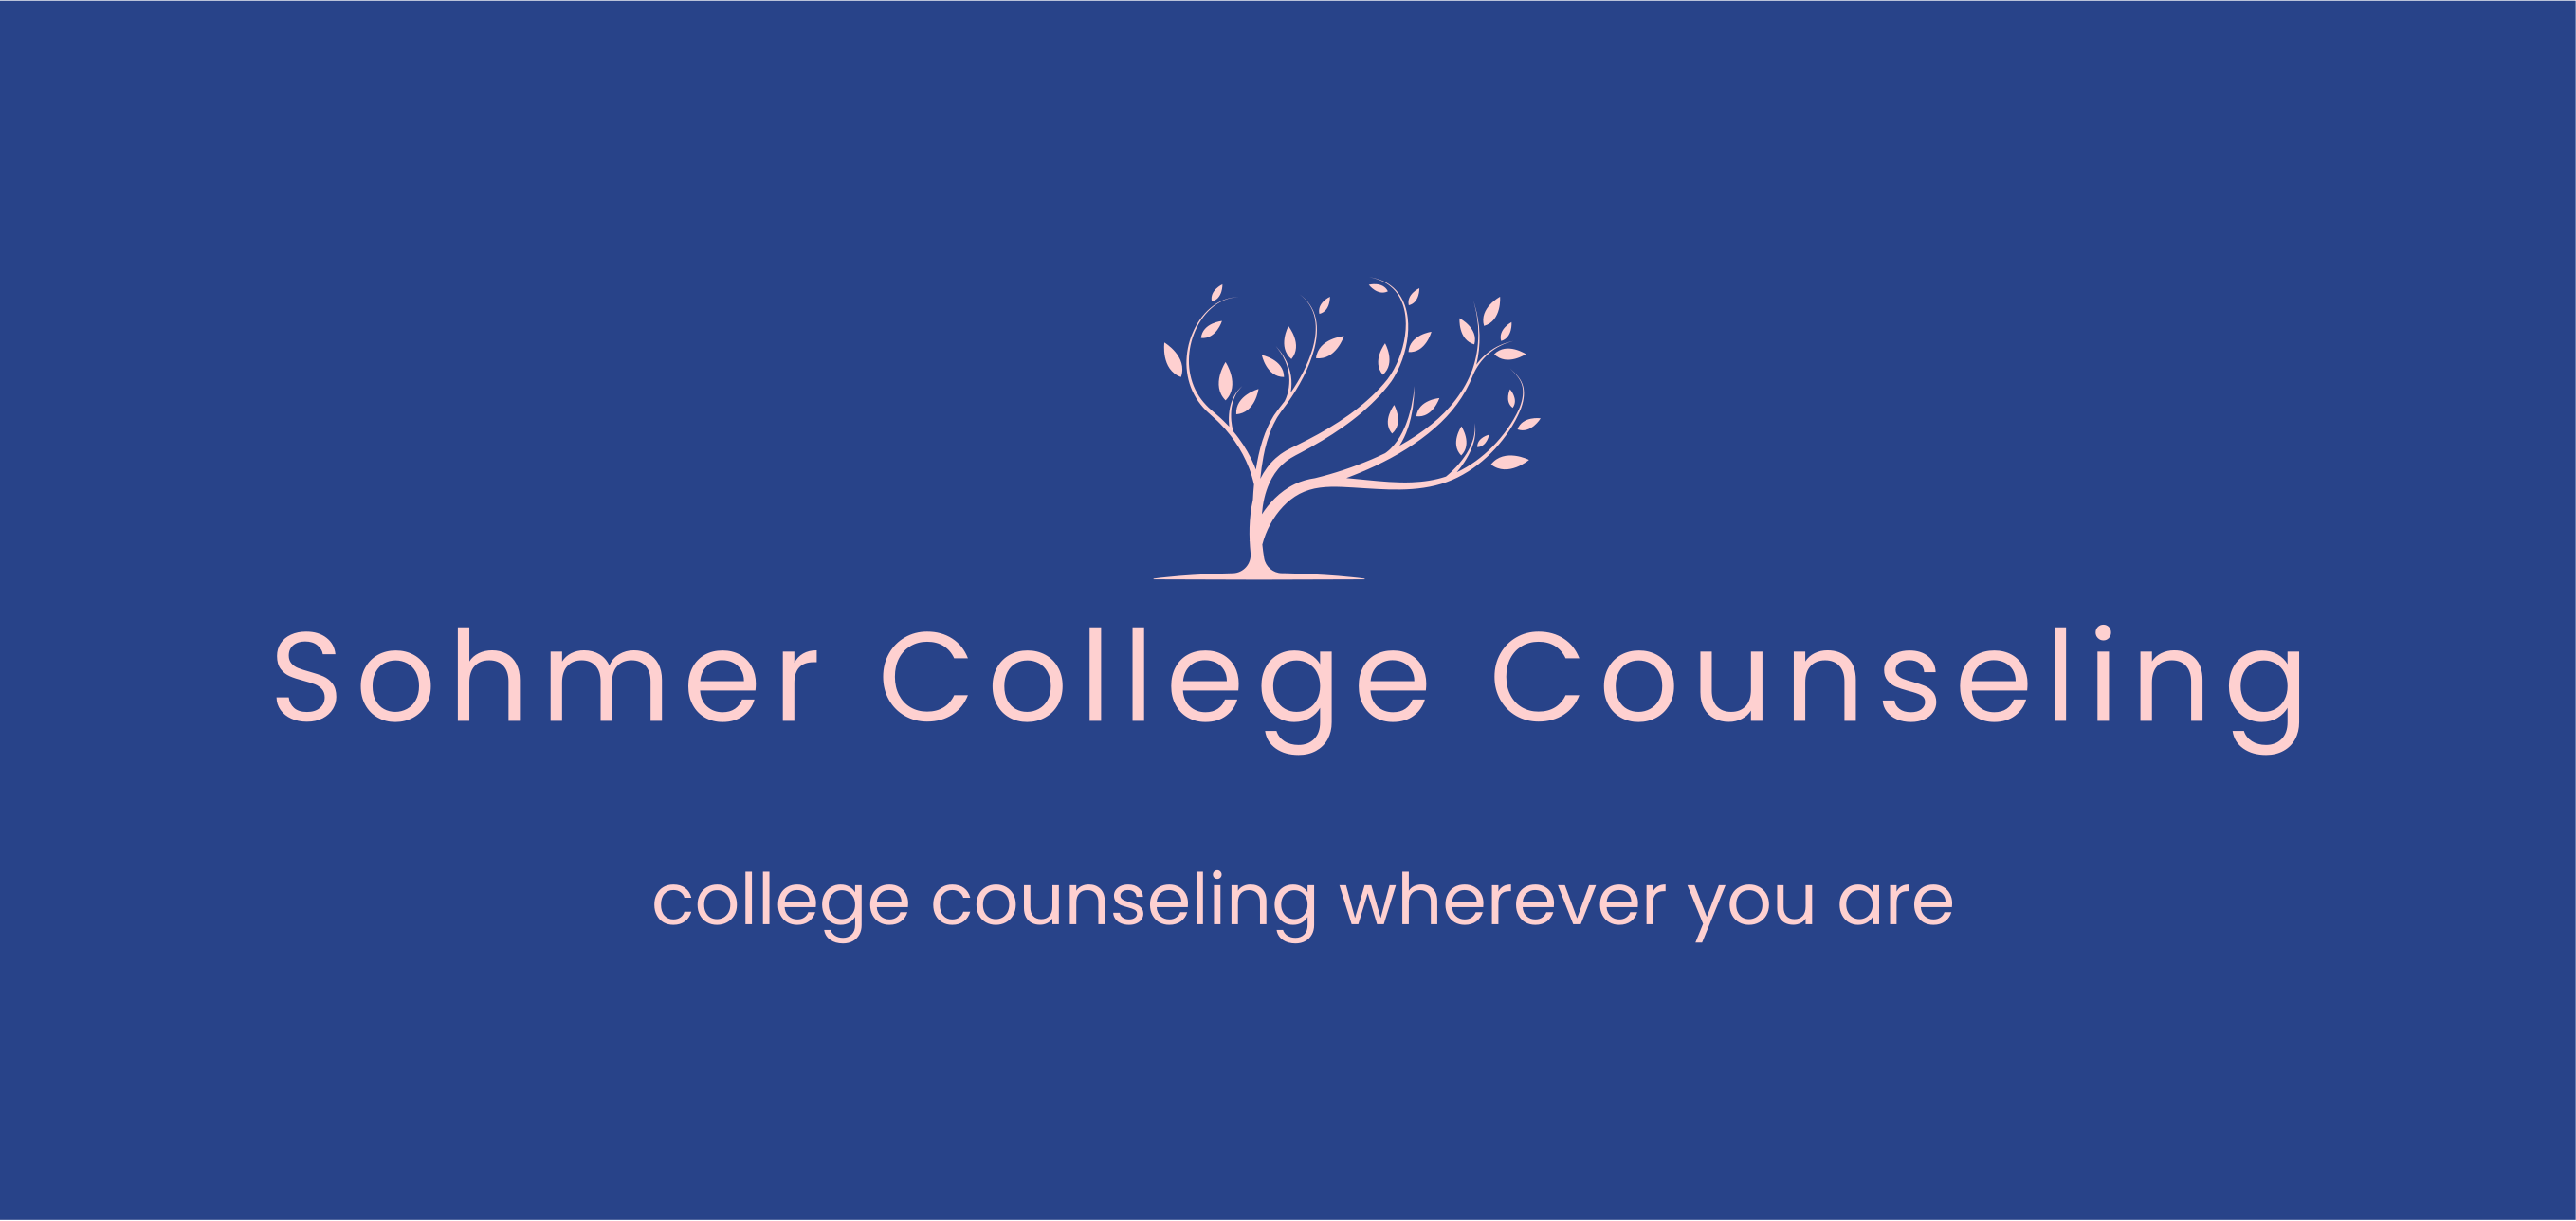 Logo for Sohmer College Counseling